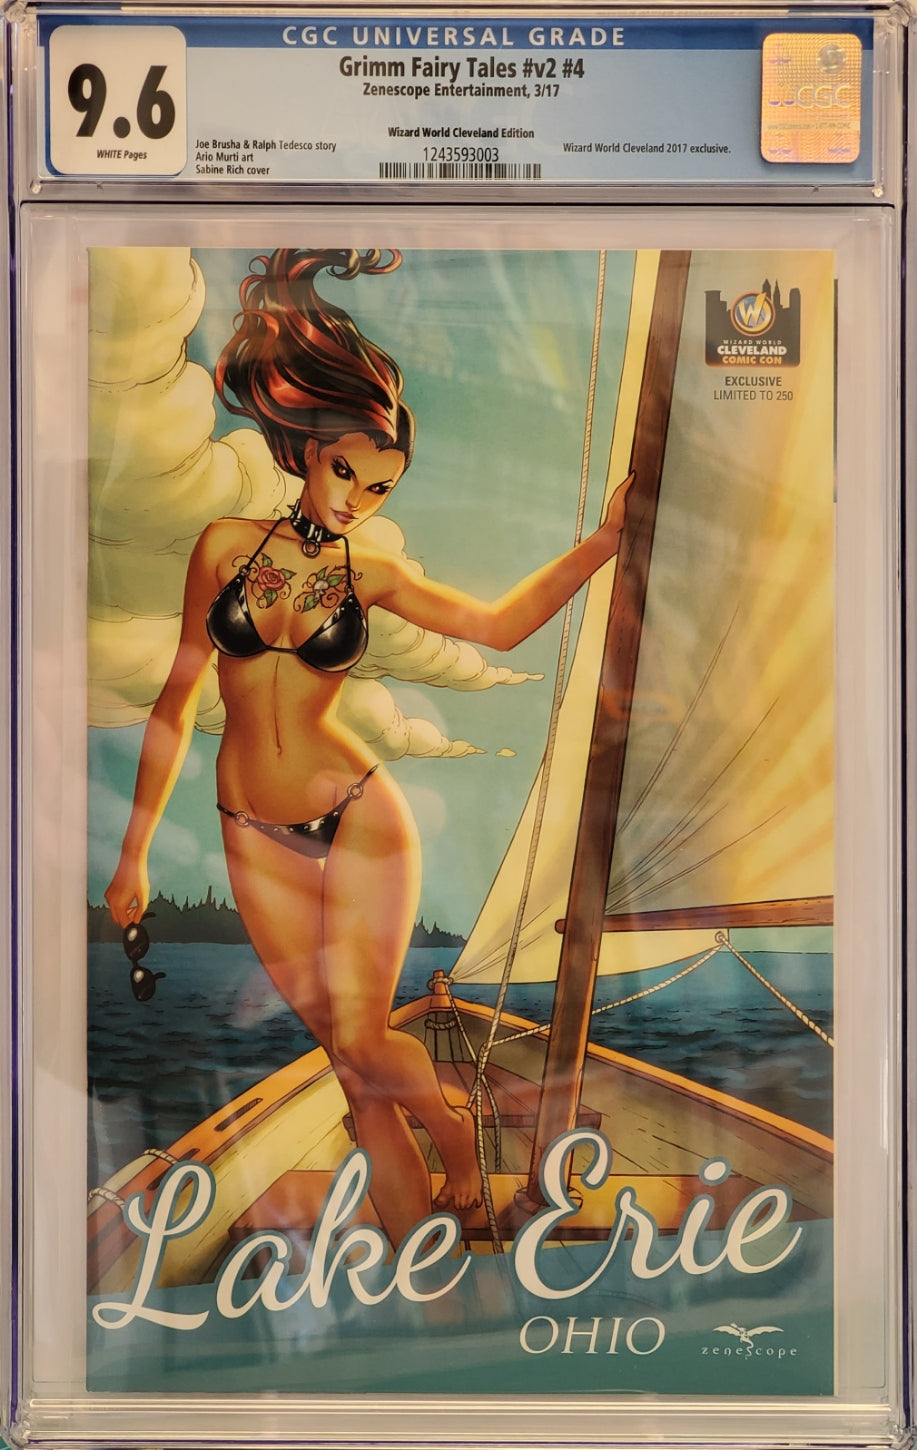 CGC 9.6 Grimm Fairy Tales Vol 2 #4 Wizard World Cleveland Edition